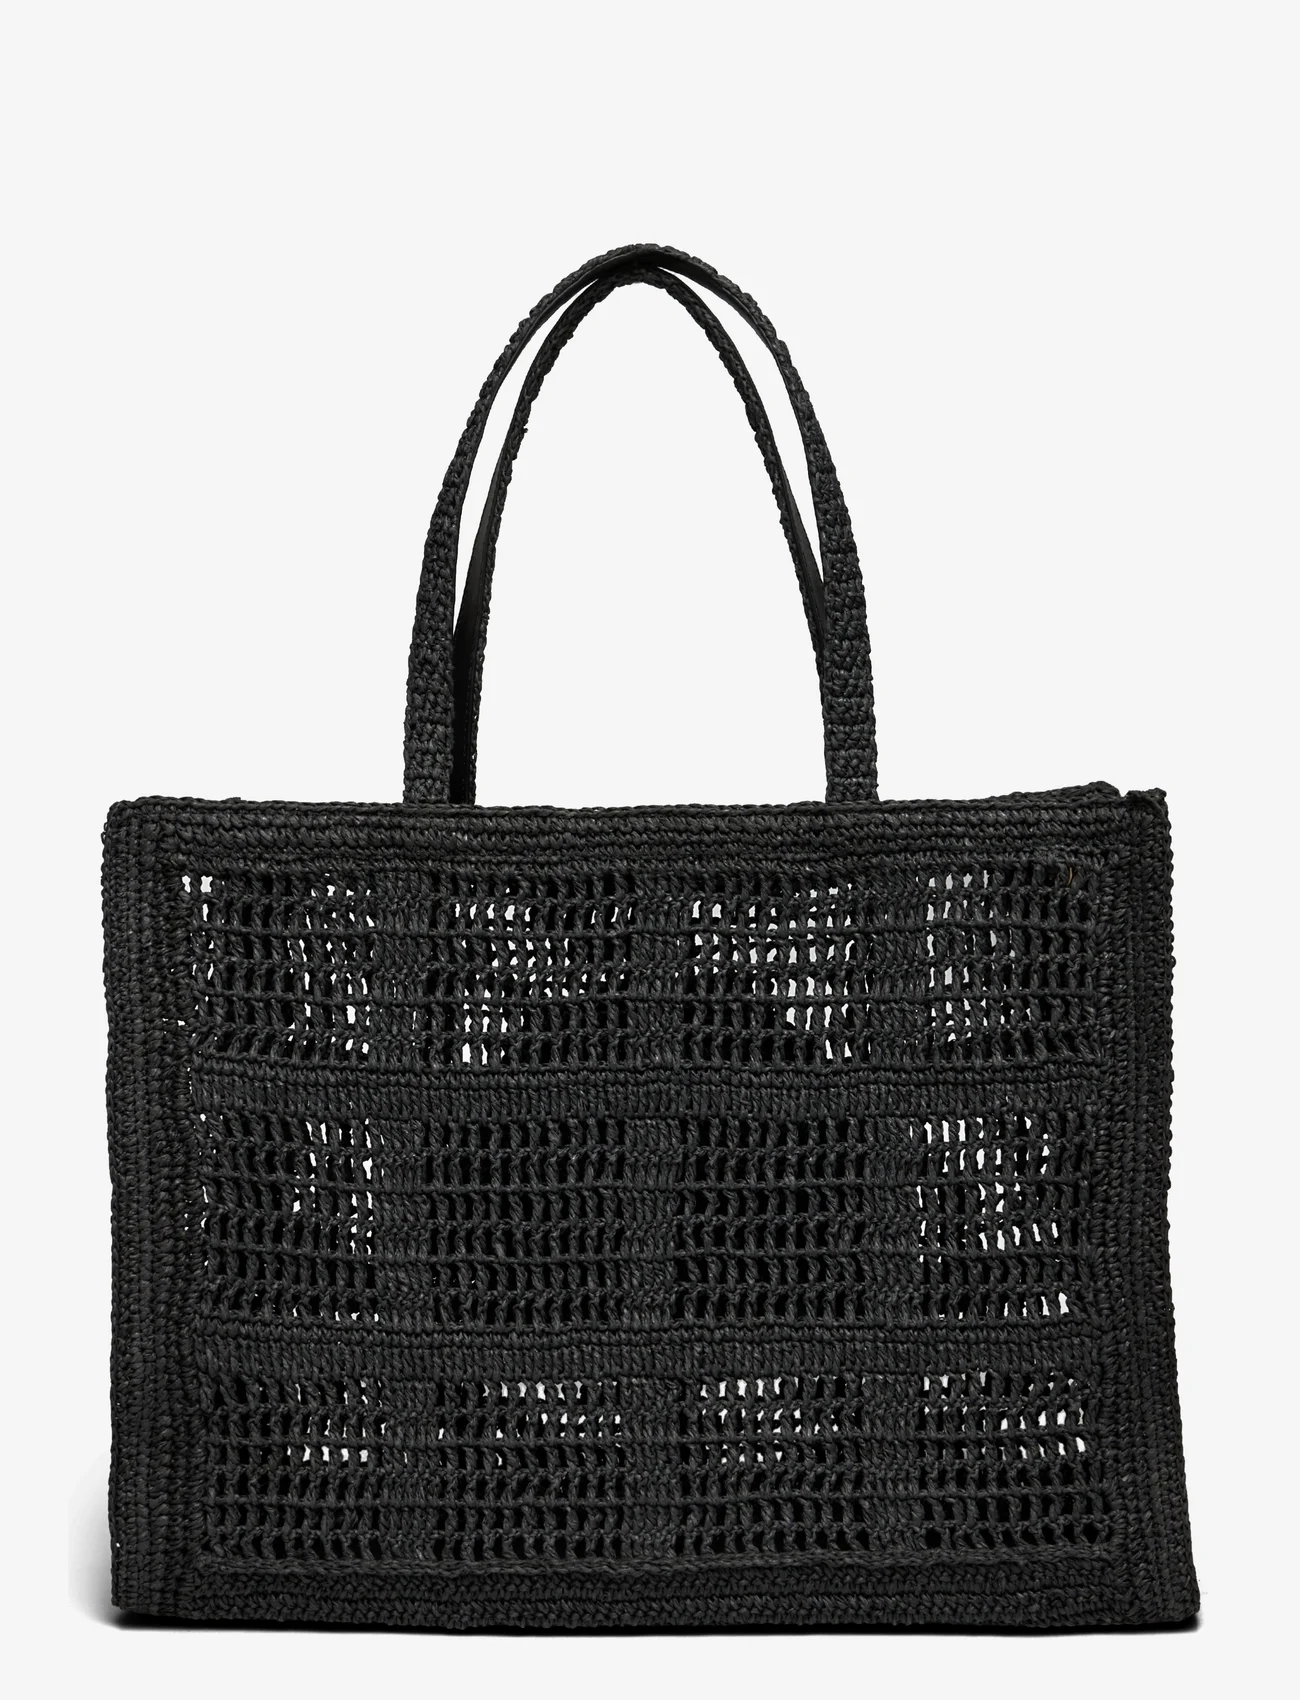 Tory Burch - Ella Hand-Crocheted Large Tote - totes - black - 1